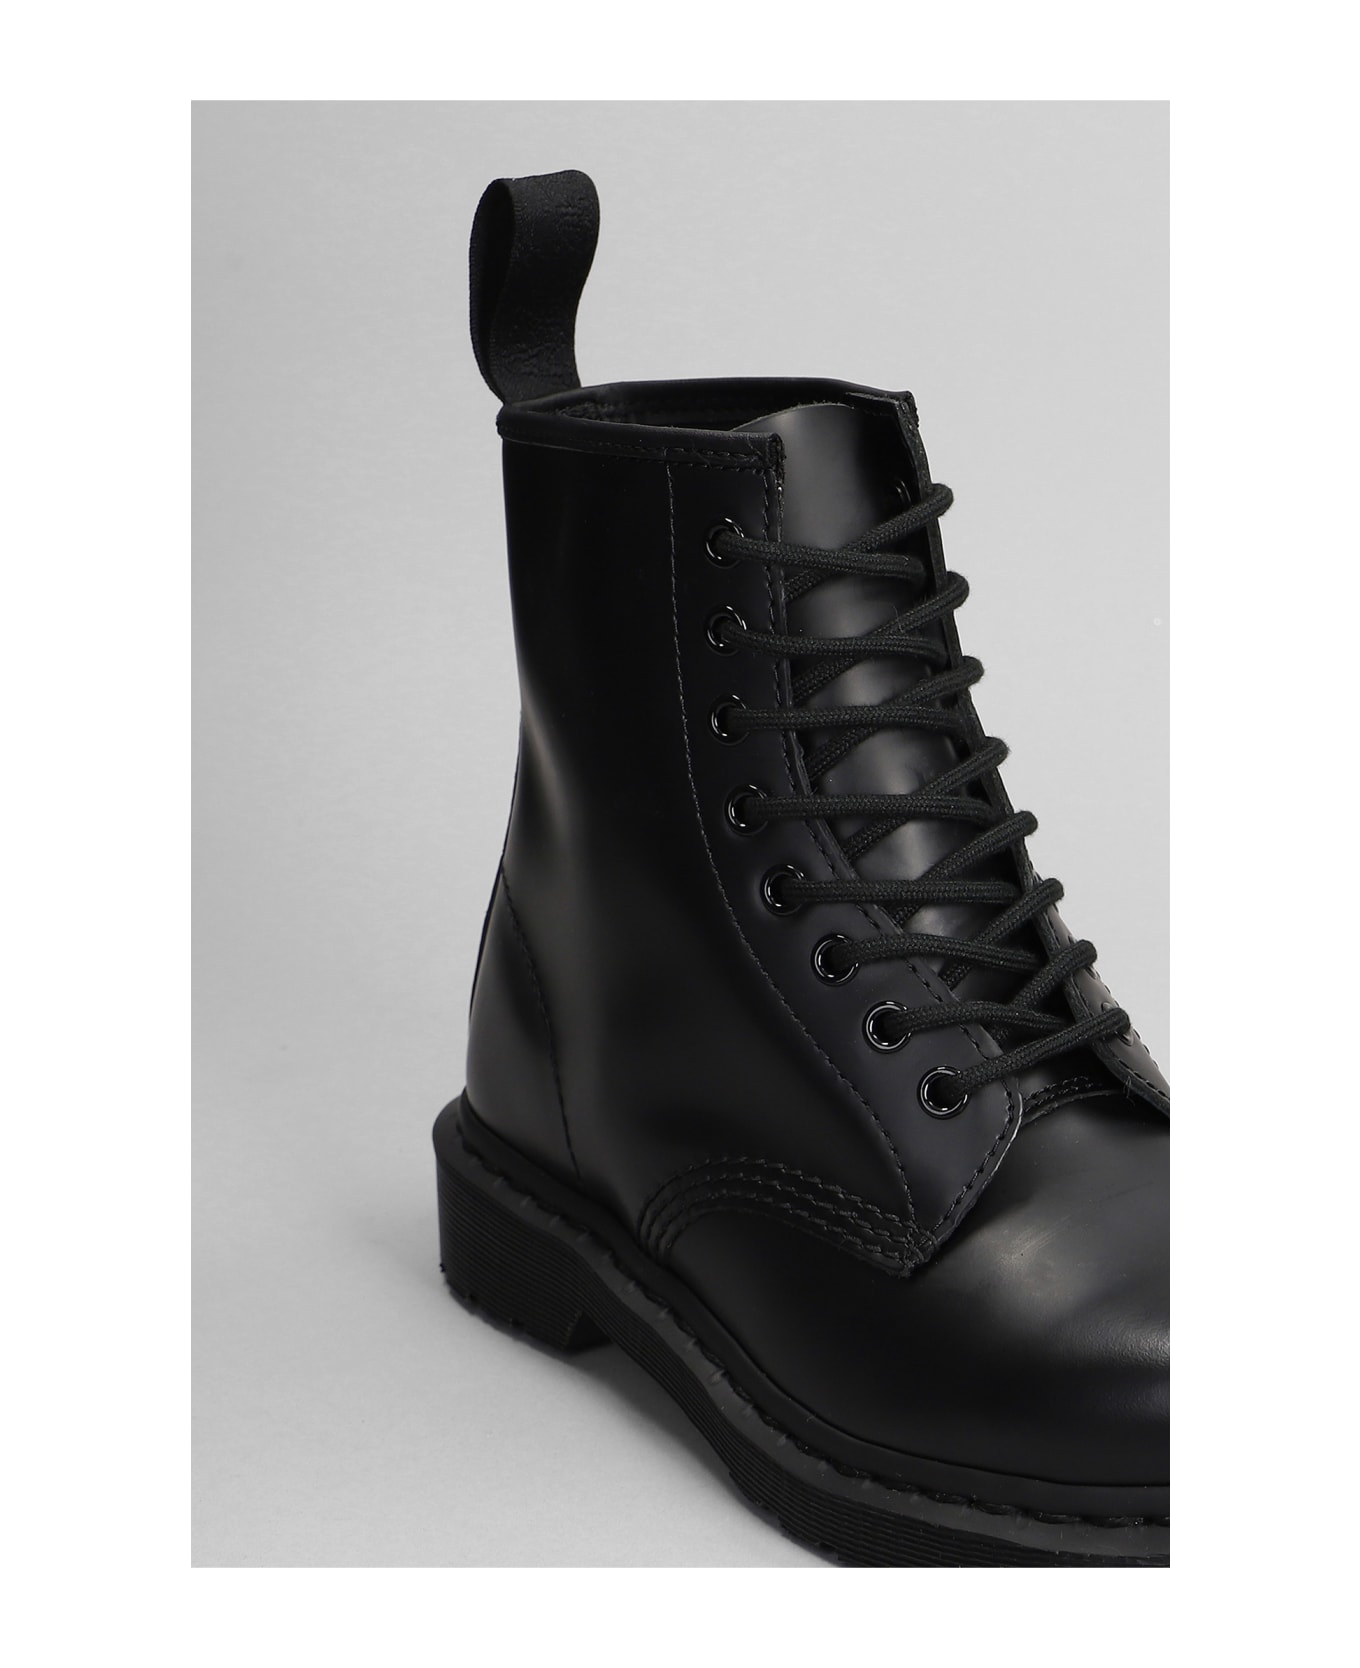 Dr. Martens 1460 Combat Boots In Black Leather - BLACK SMOOTH